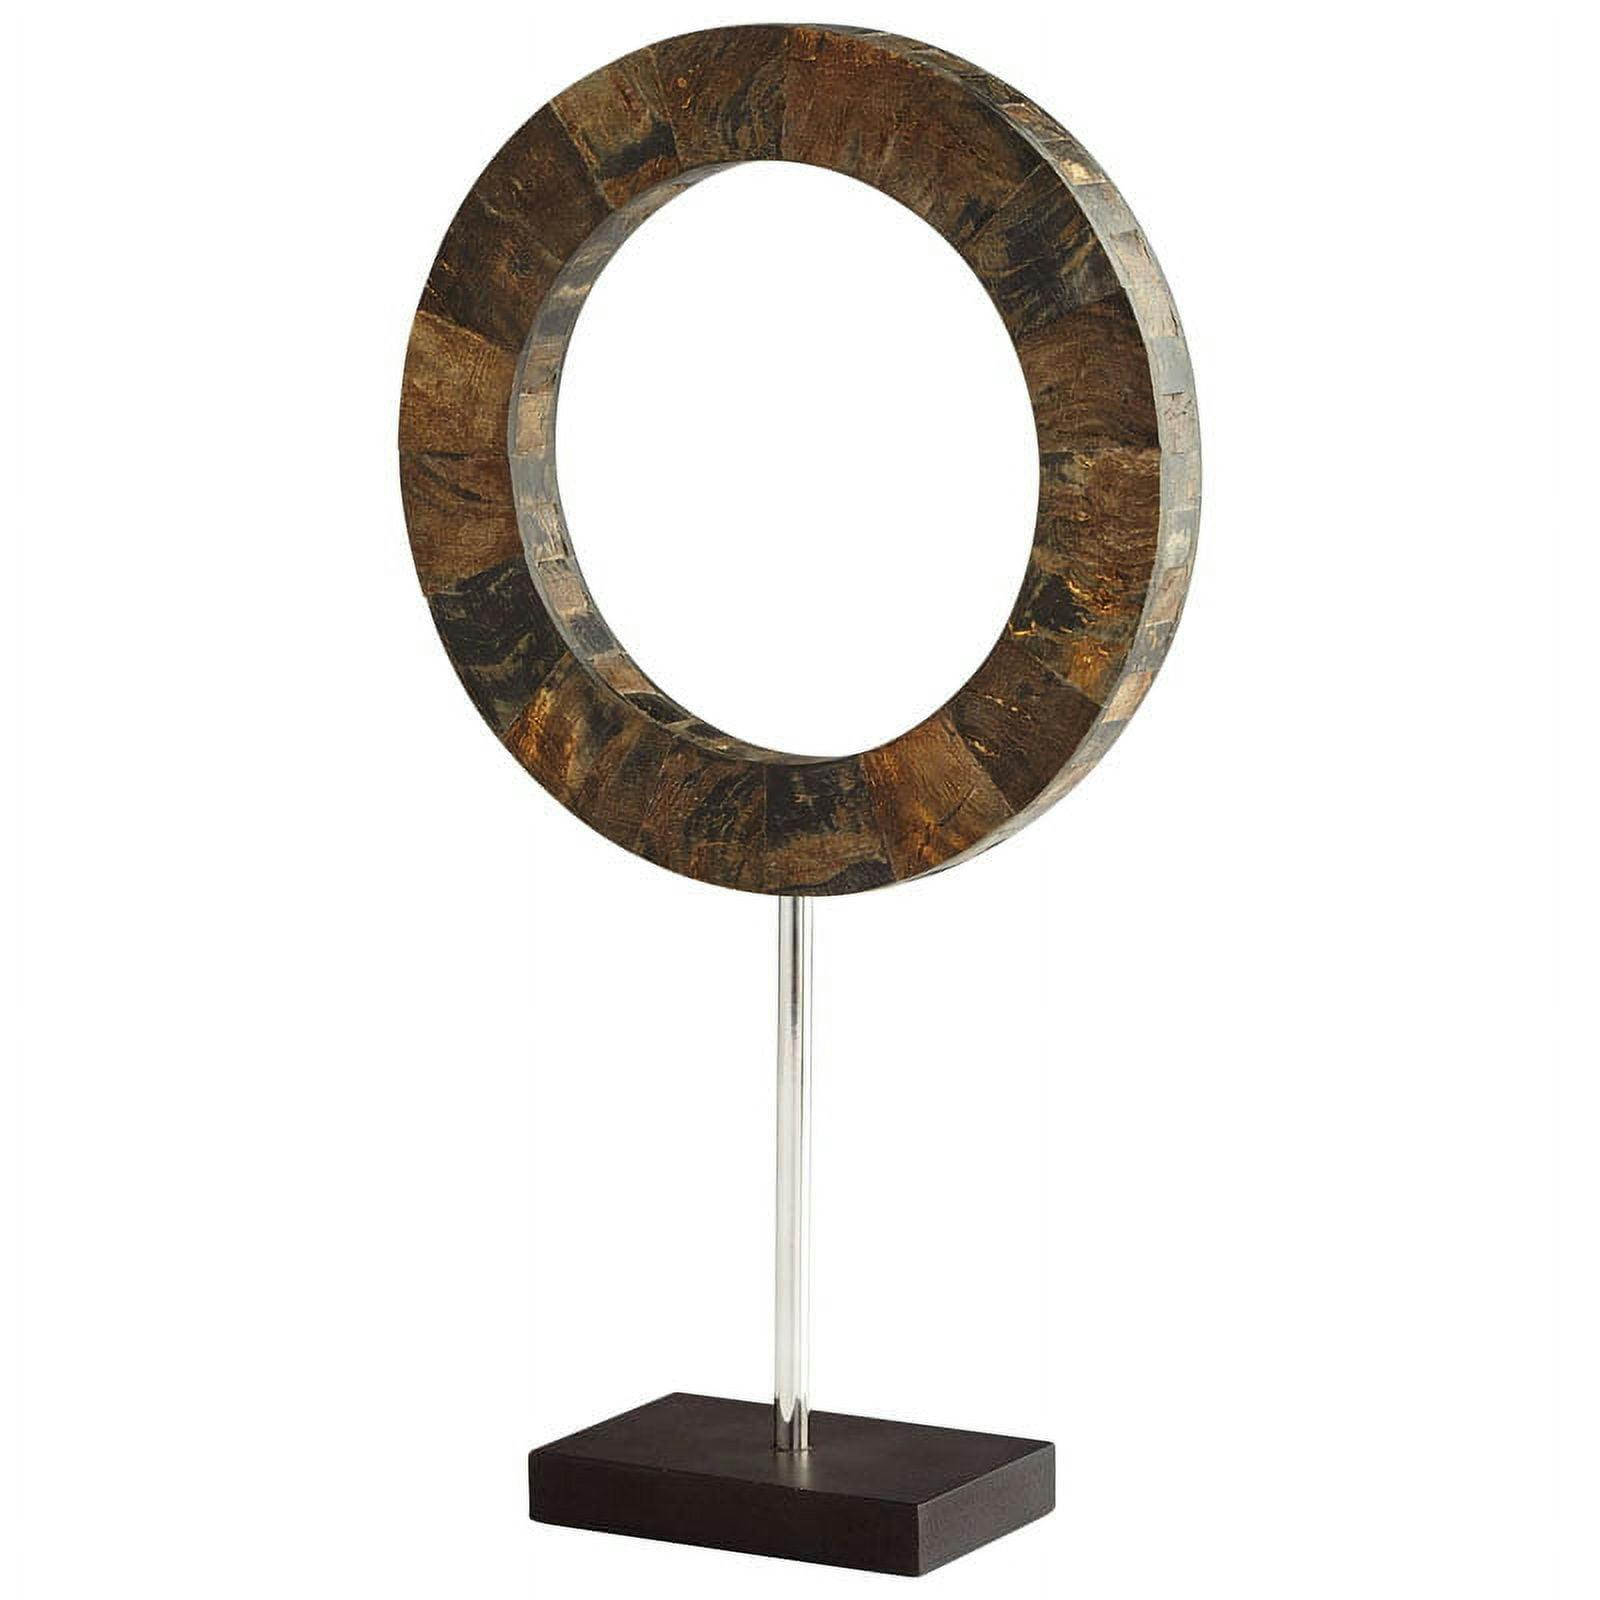 Contemporary Weathered Wood Ring Sculpture on Metal Base, 19.75"